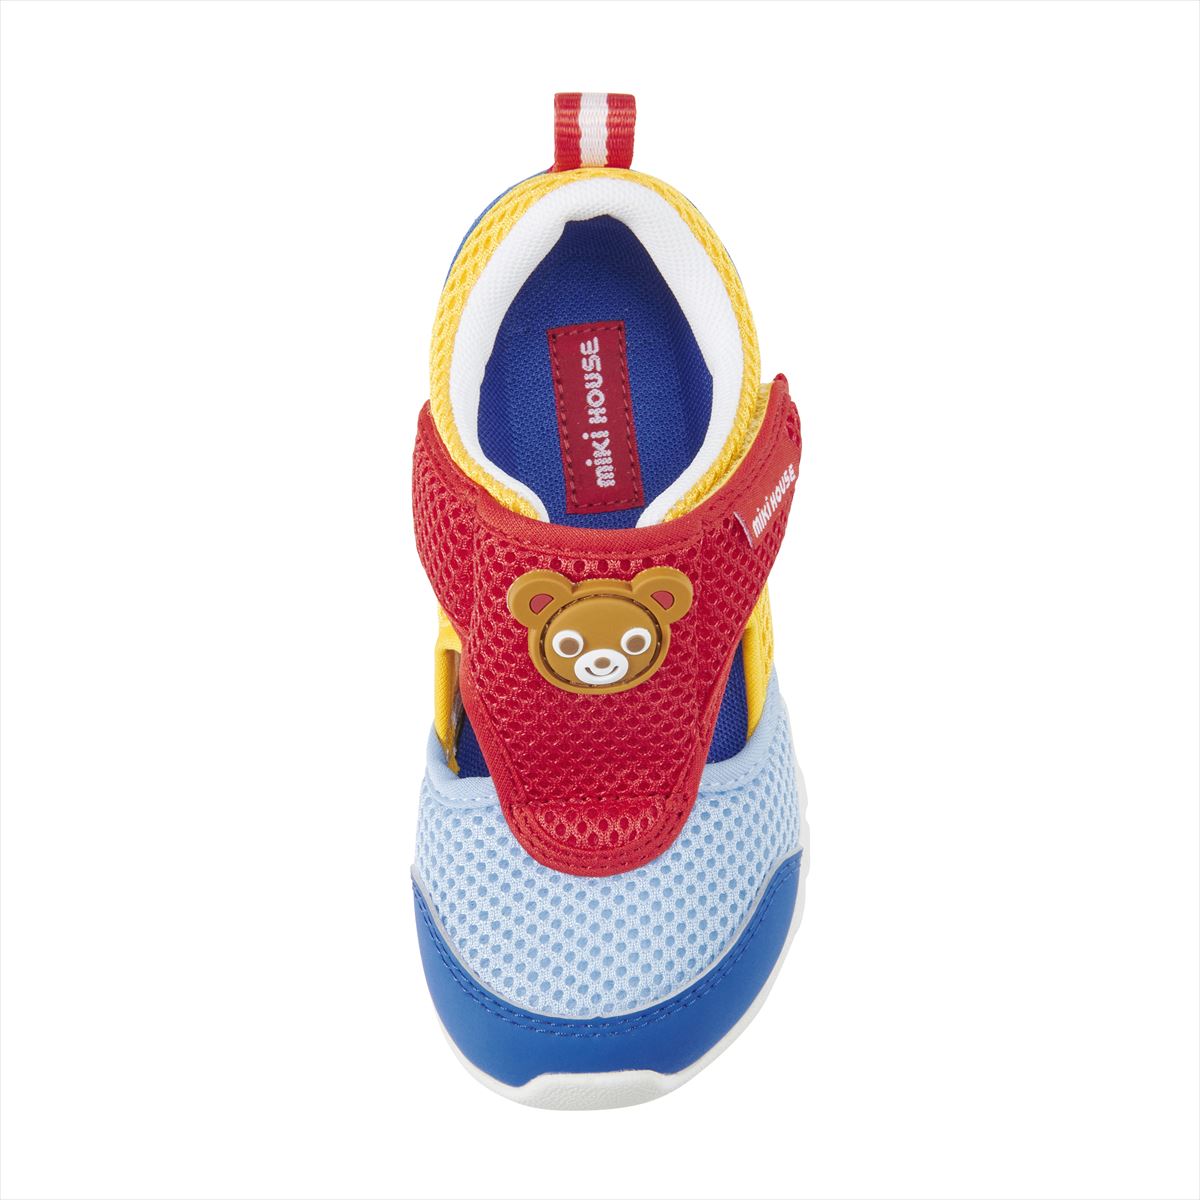 Double Russell Mesh Sneakers for Kids - Fun Flare